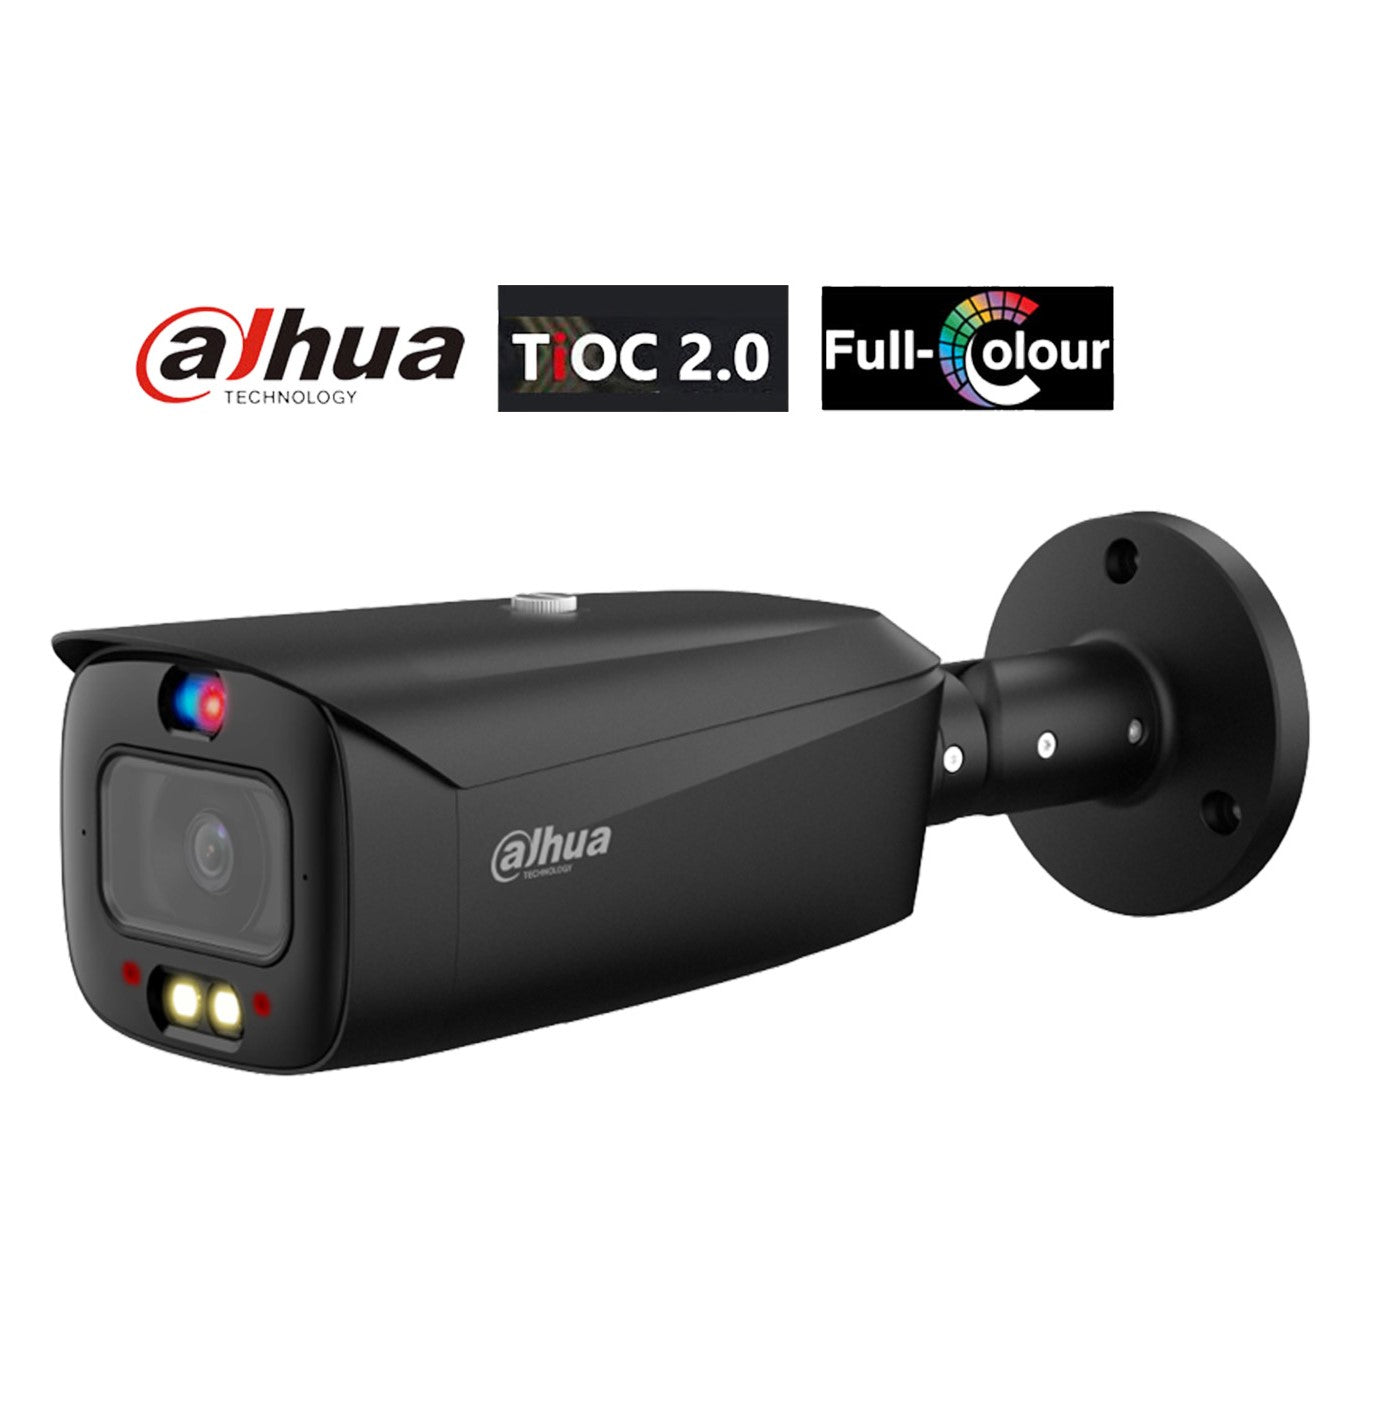 Dahua 6MP, Bullet Security Camera (Black). TiOC 2.0, WizSense, Full-Colour, Active Deterence DH-IPC-HFW3649T1-AS-PV-ANZ